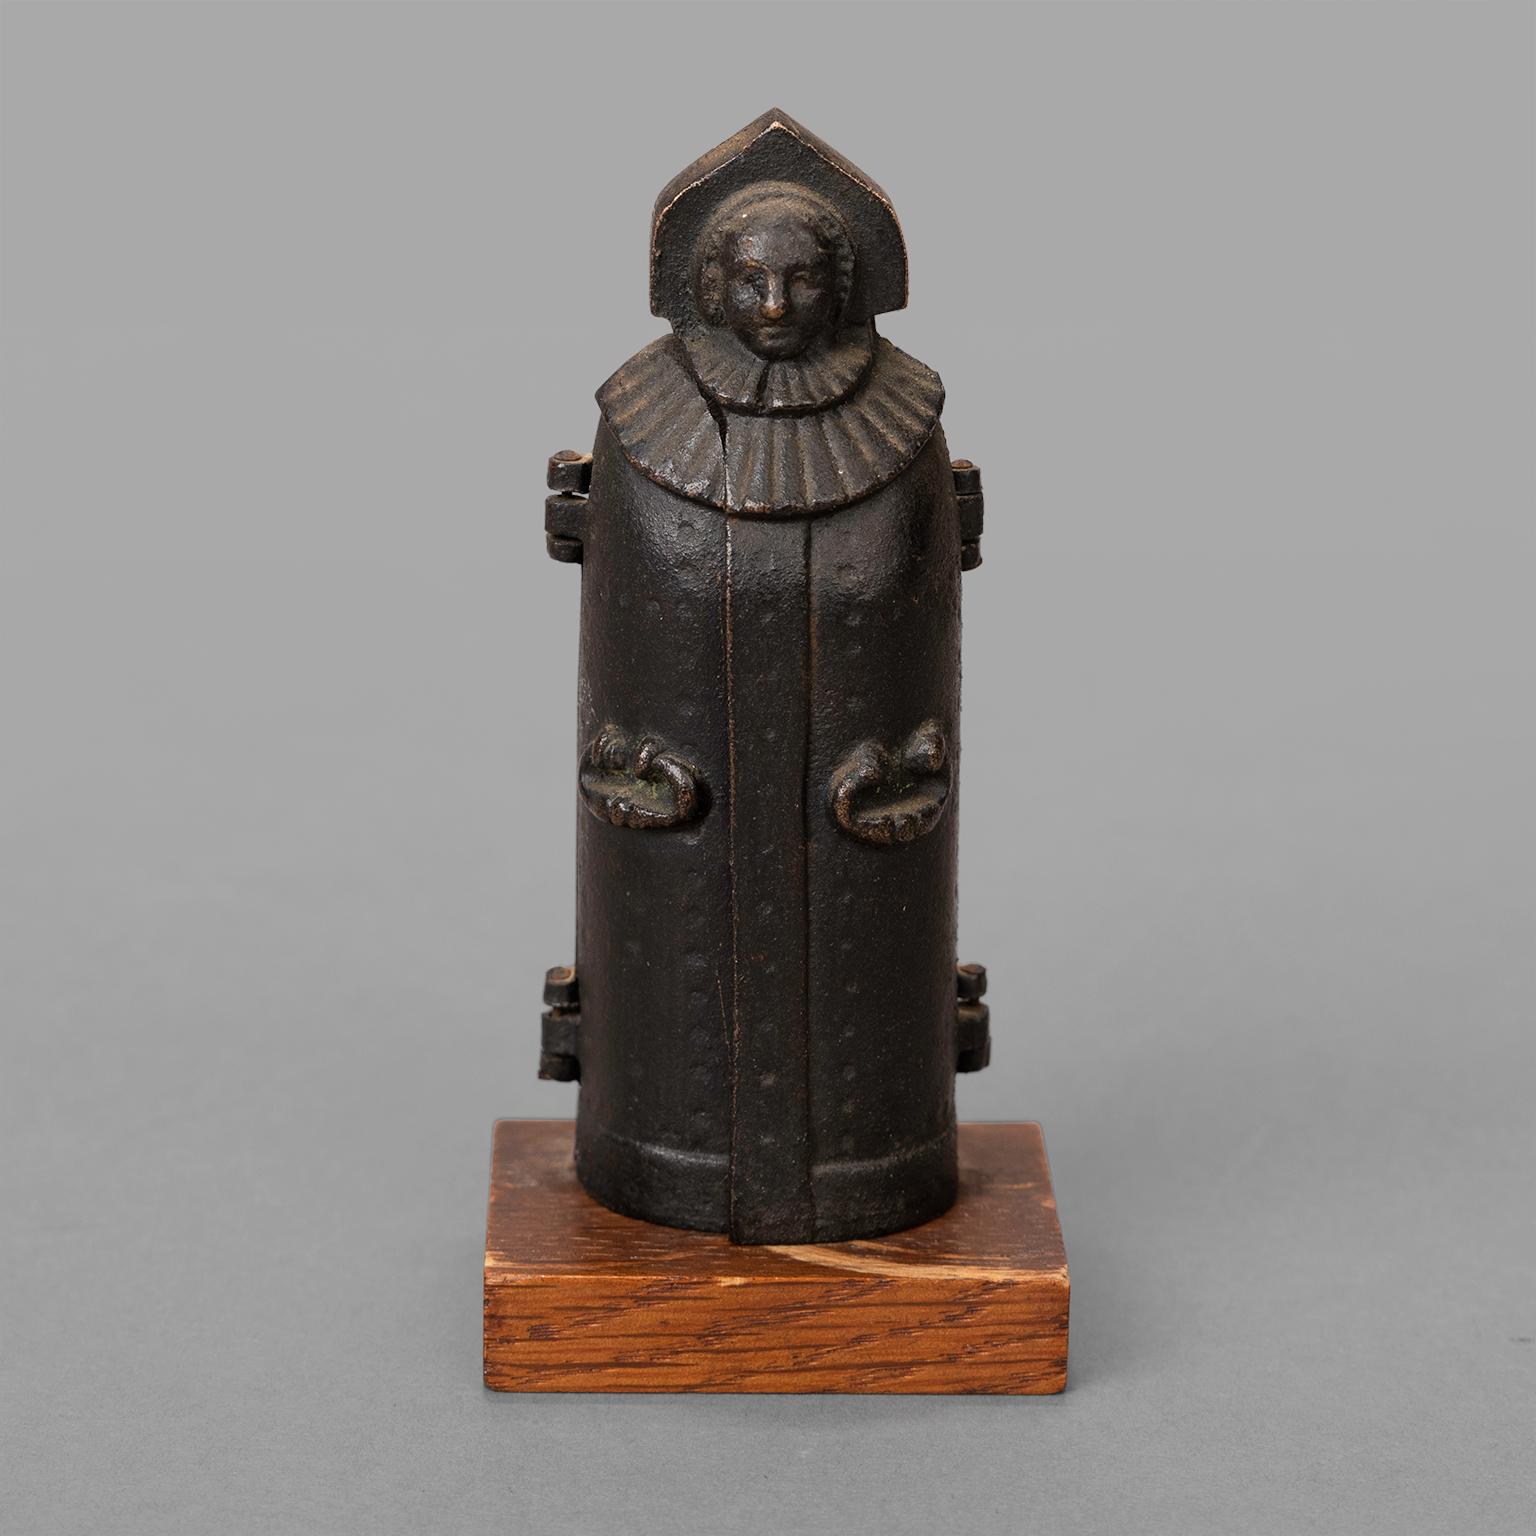 Also called the Nuremberg Virgin, this cast iron miniature represents the infamous torture machine known as the iron maiden. These models were most likely sold as souvenirs during the visit to the castle of Nuremberg in the 1910s.